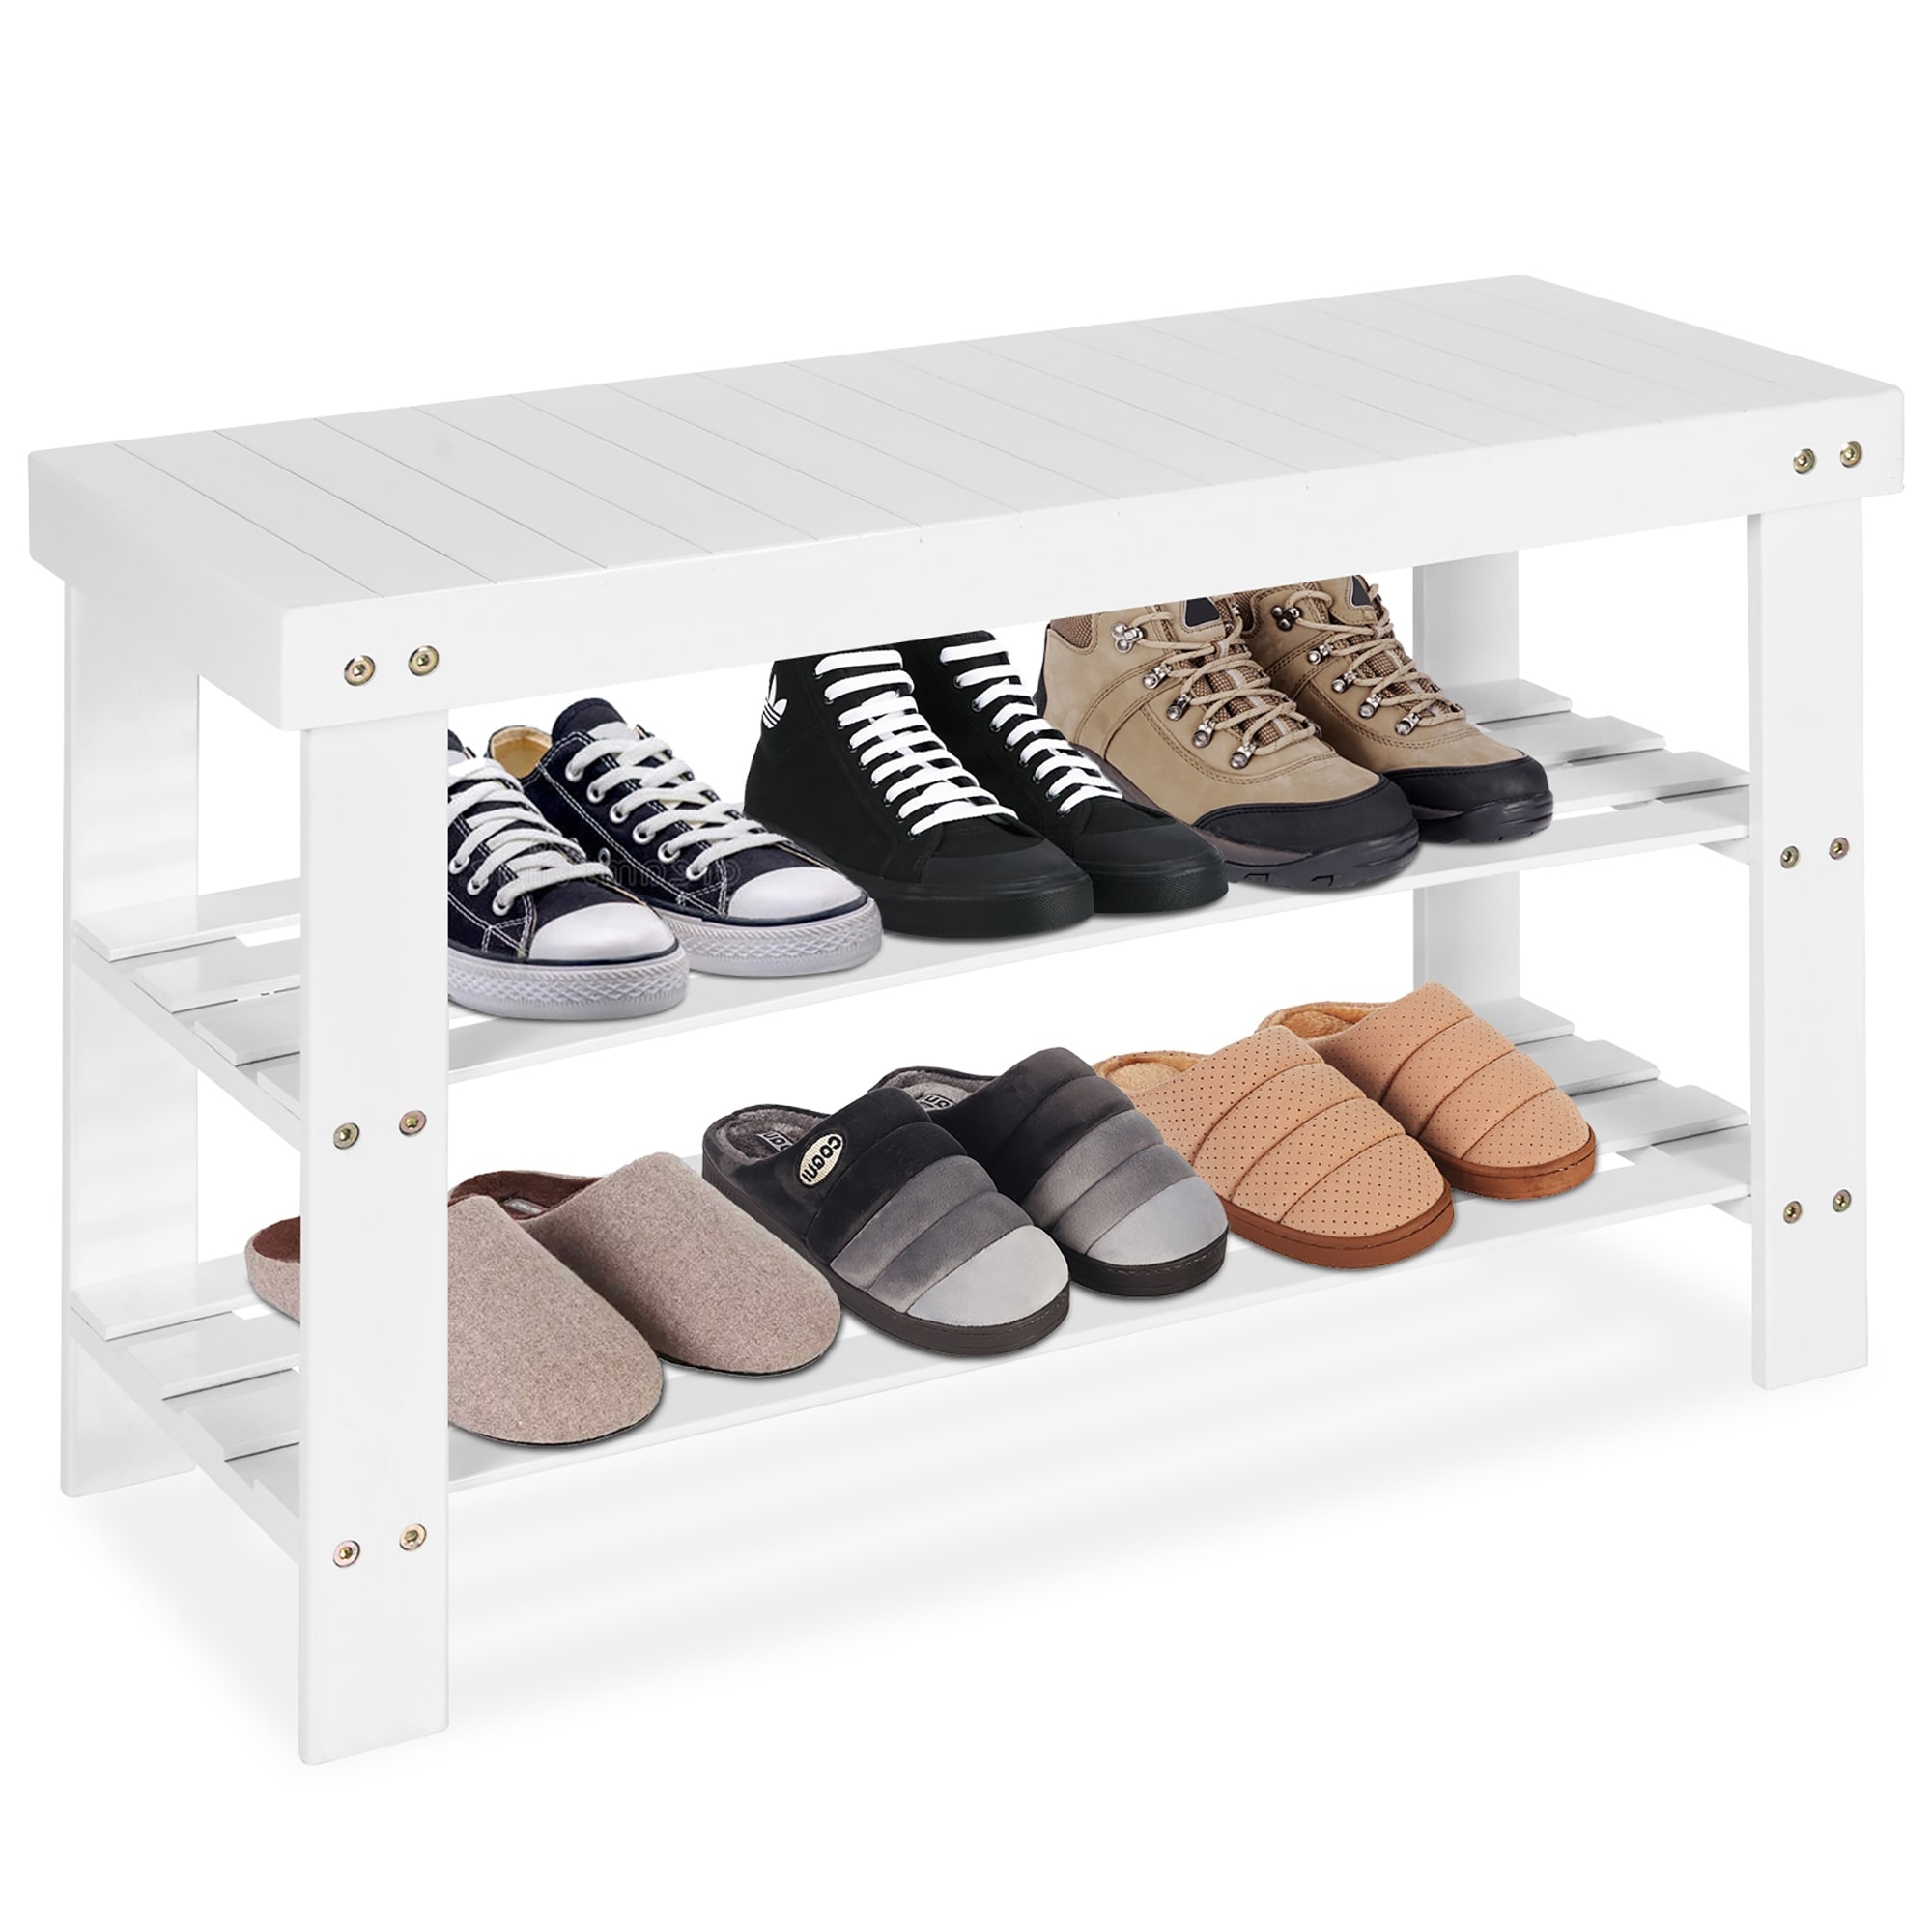 https://ak1.ostkcdn.com/images/products/is/images/direct/f470b21a7c6bce8092349373bea02c9ba6a2e8ae/Costway-Bamboo-Shoe-Rack-Bench-3-Tier-Storage-Shelf-Holder-Home.jpg